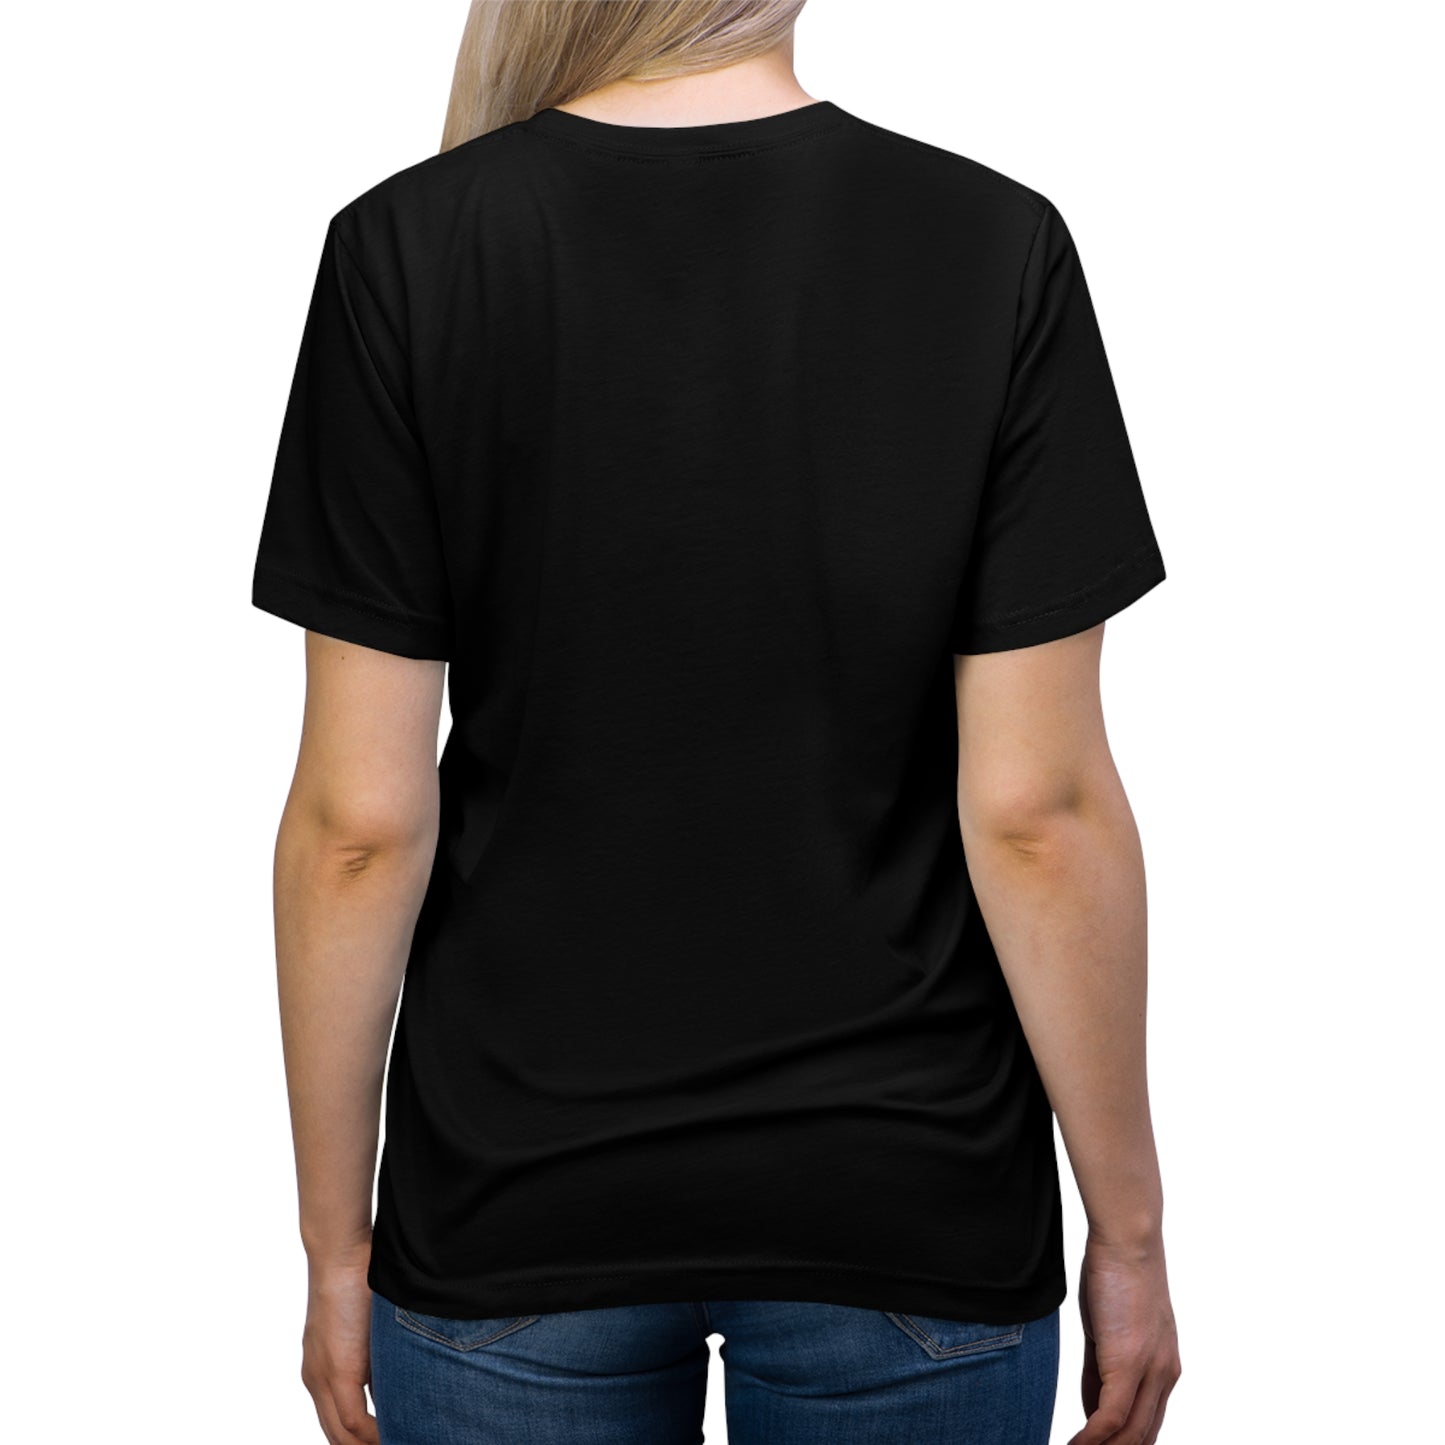 Let In The Light Unisex Triblend Tee